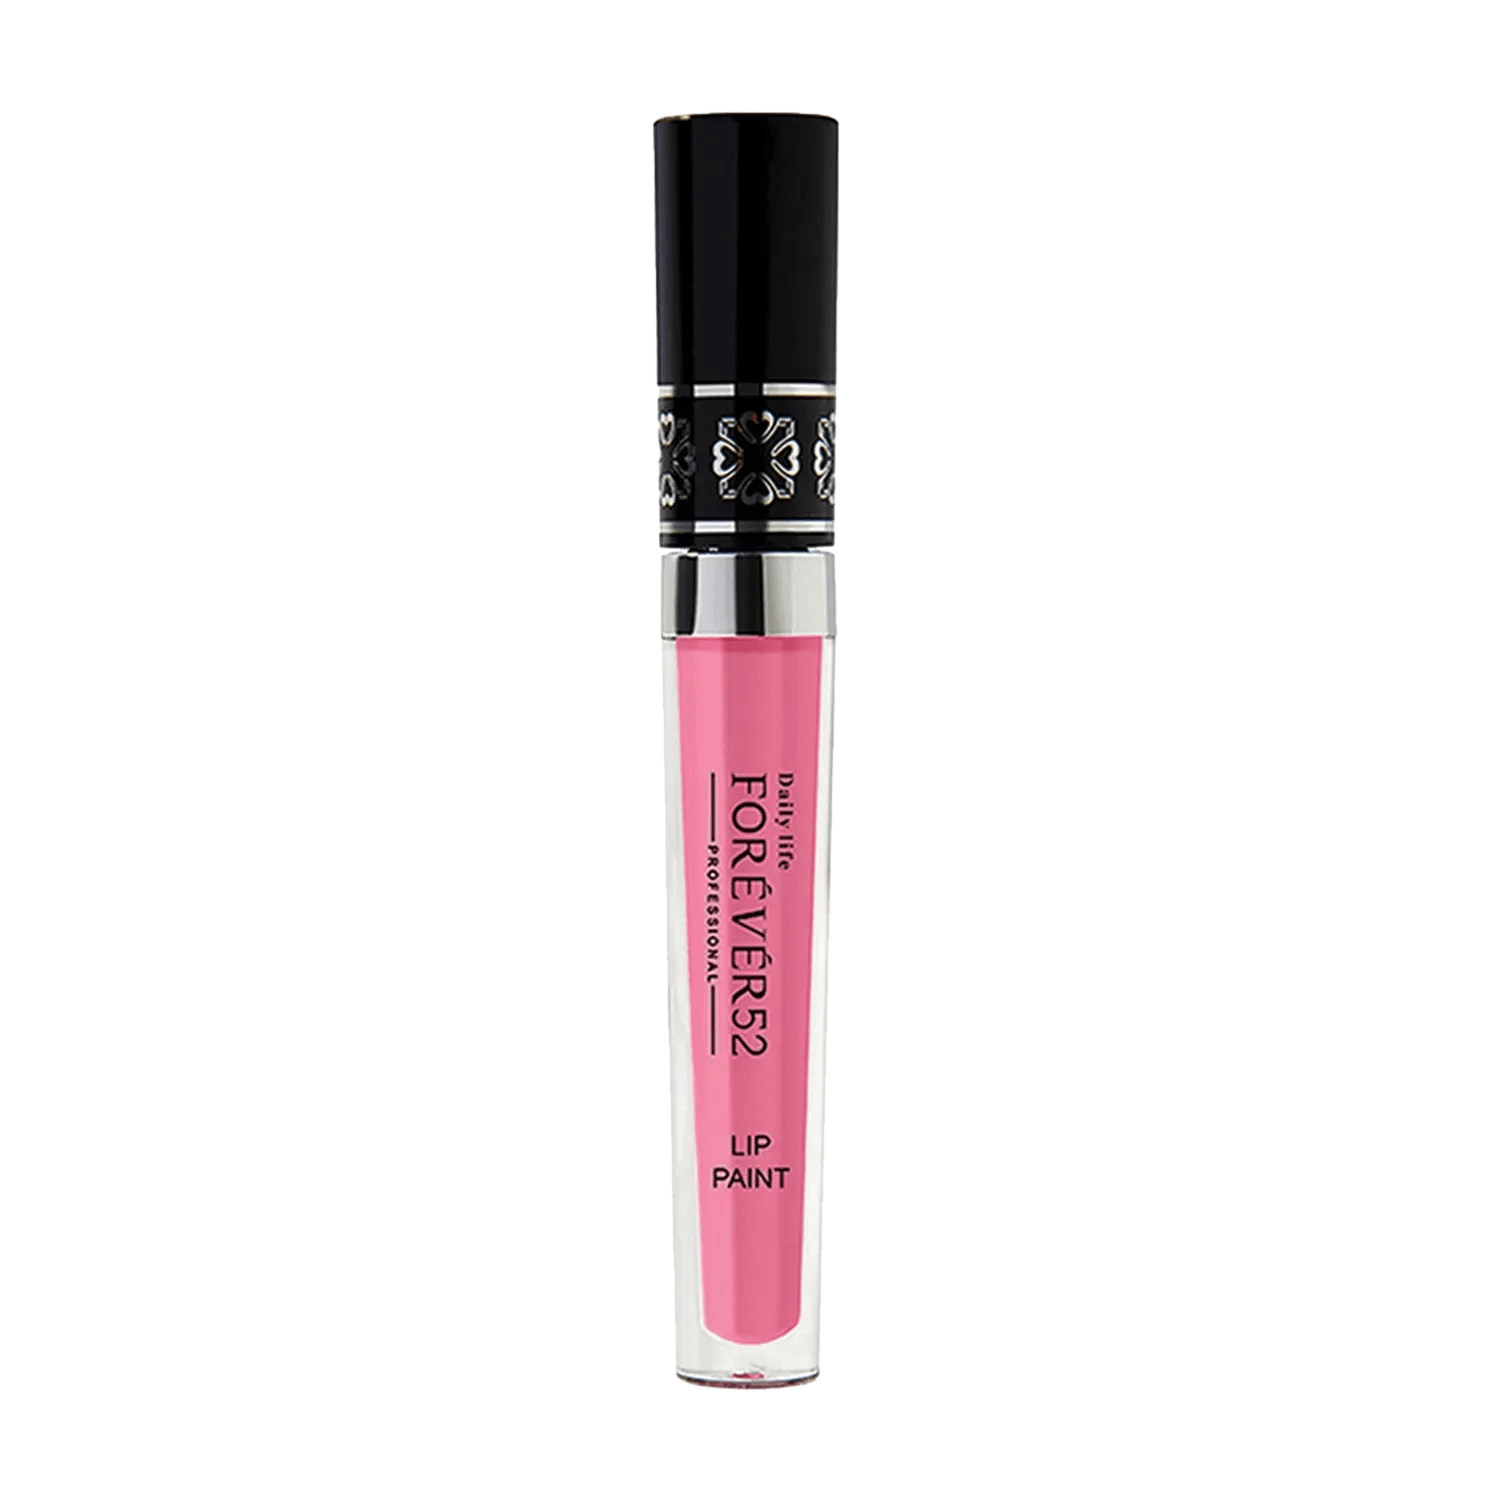 Daily Life Forever52 | Daily Life Forever52 Lip Paint FM0708 (8gm)